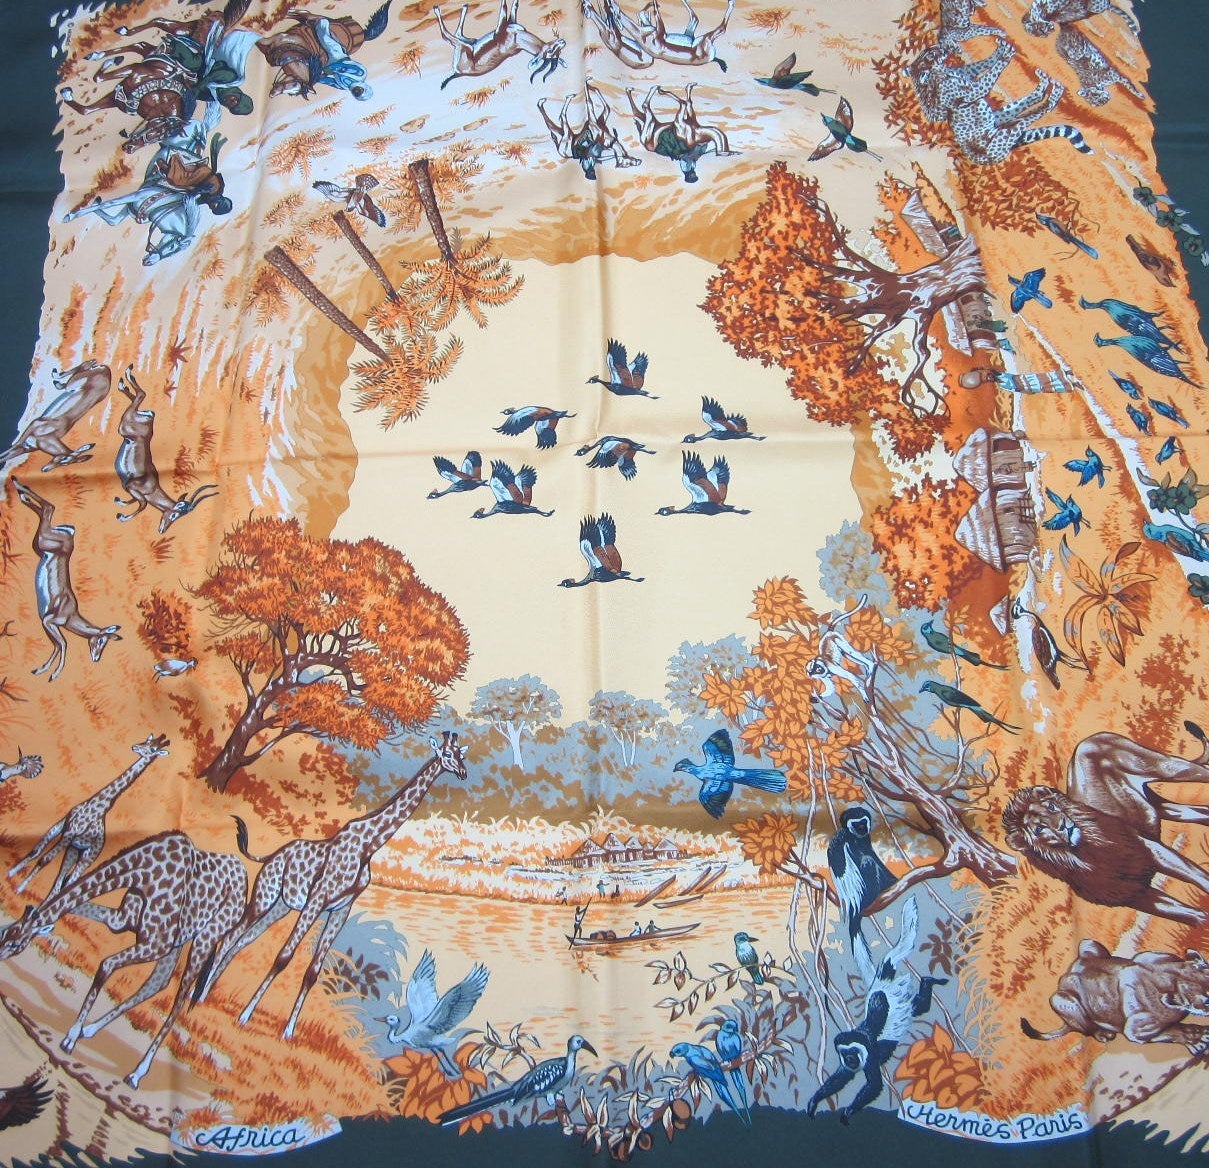 Birds, monkeys and other wildlife depicted in this Silk Hermes scarf 

Measuring 34 x 34
1997 Robert Dallet 

Any questions please call or hit 